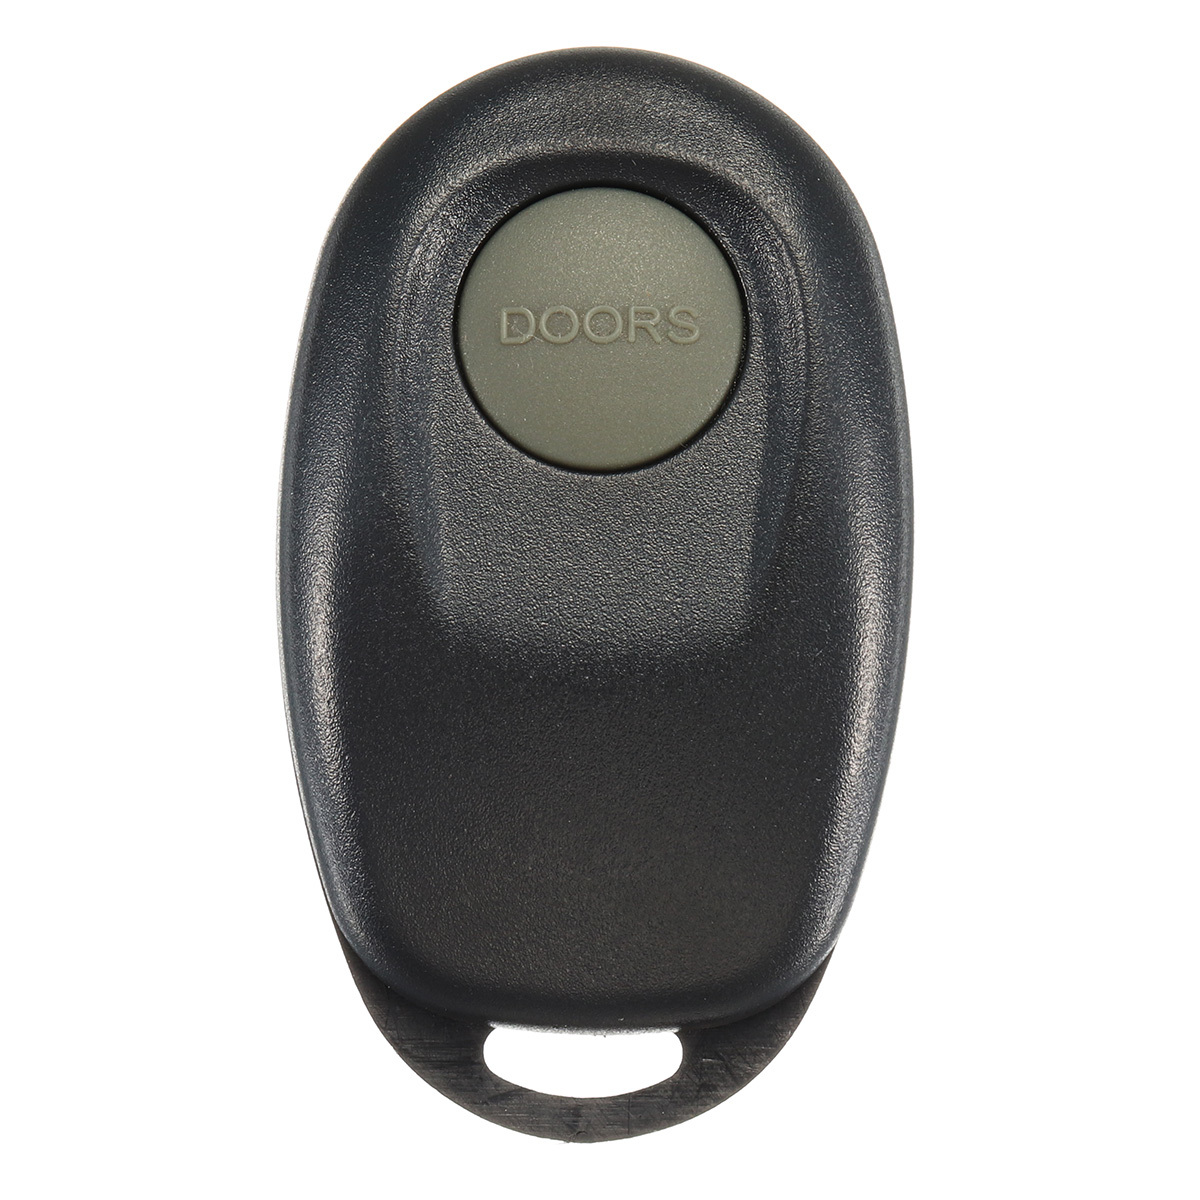 One Car Button Remote Control Case Shell Replacement For Toyota Camry Avalon 2000-04 1